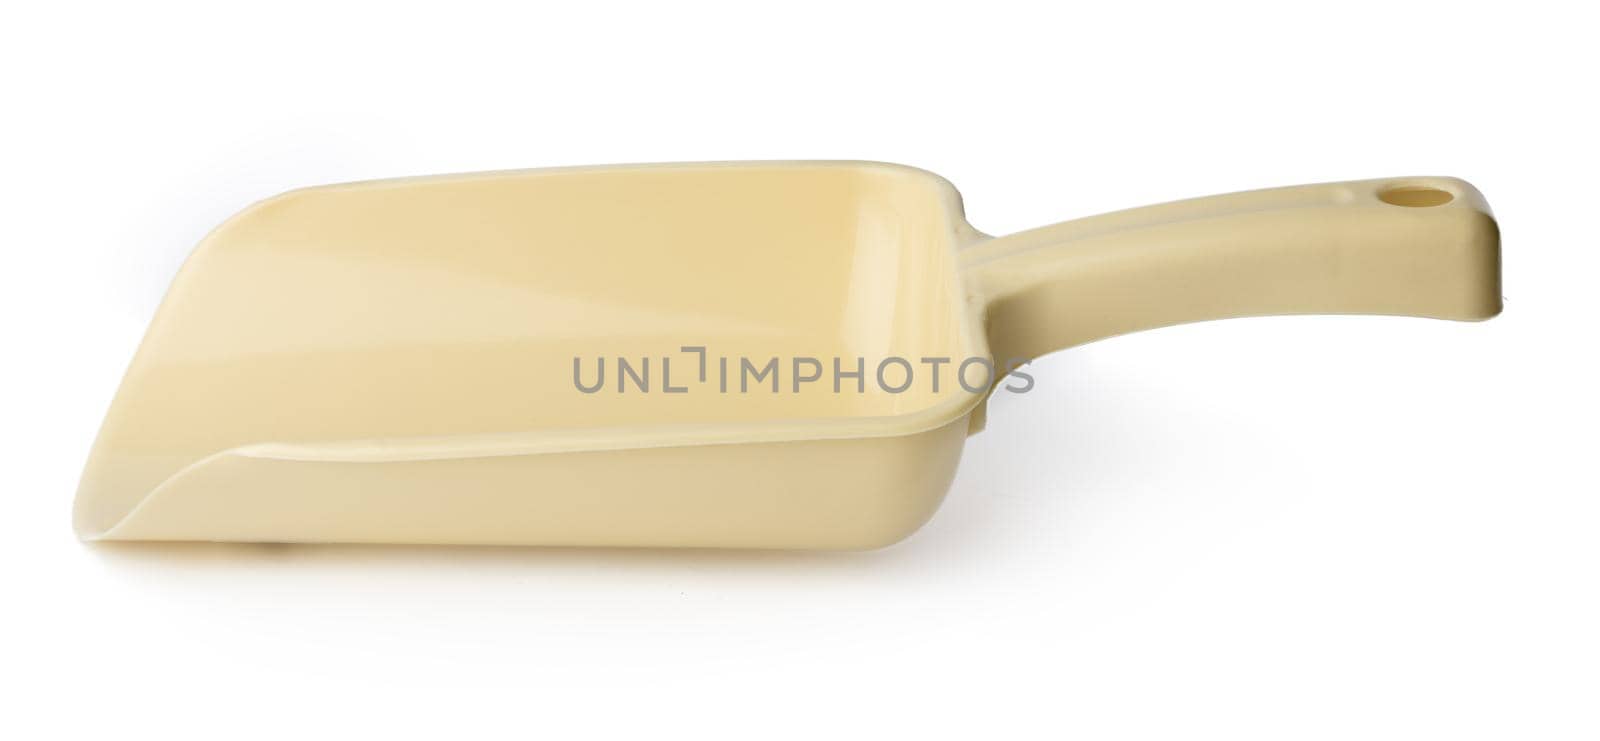 New plastic household scoop isolated on white background